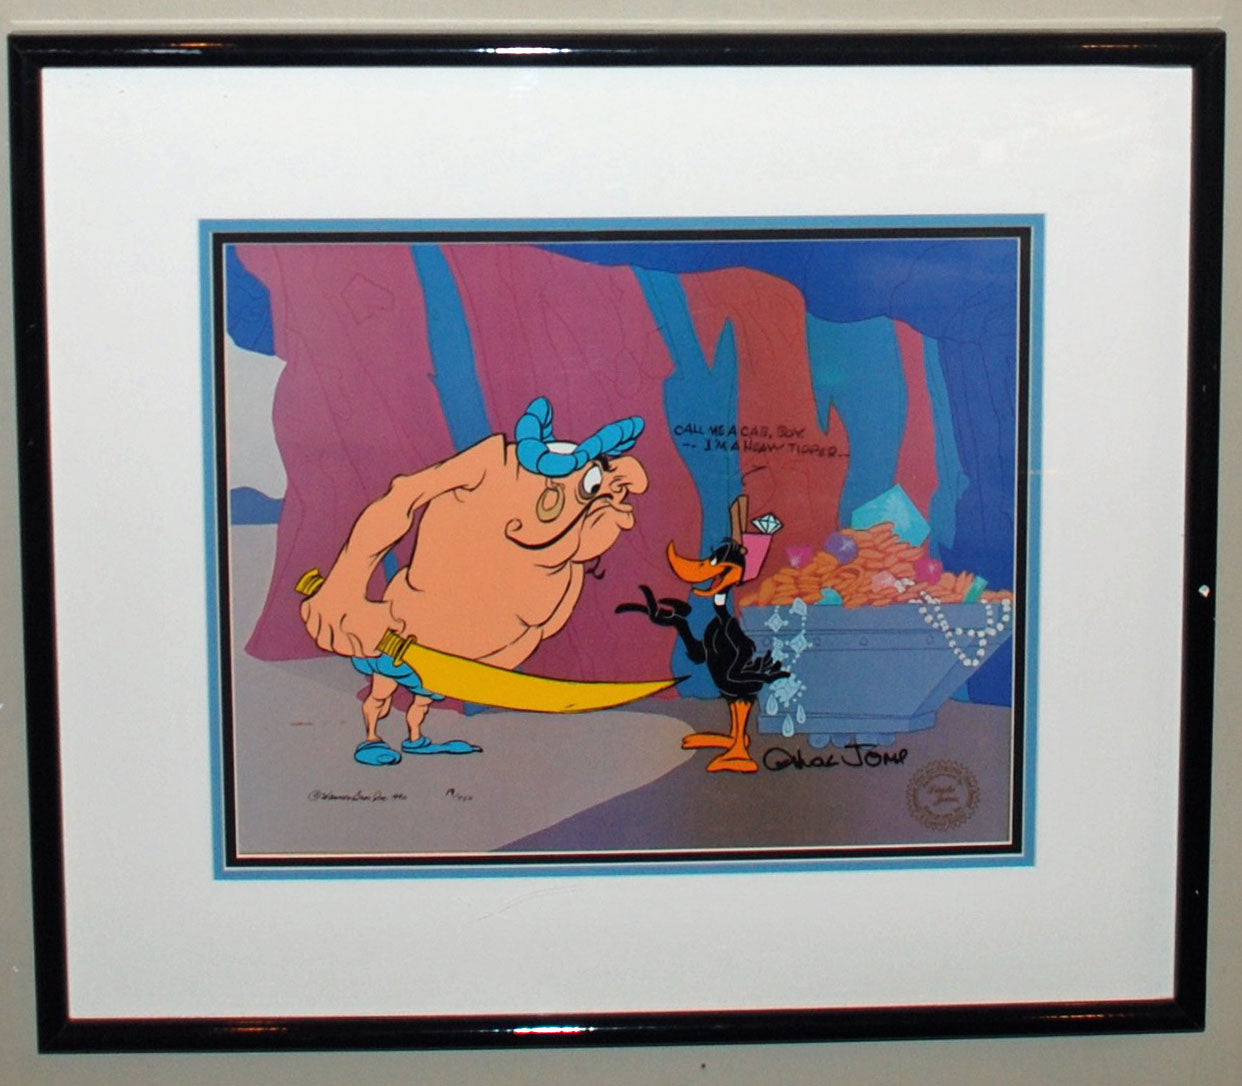 Original Warner Brothers Limited Edition Cel, Call Me A Cab